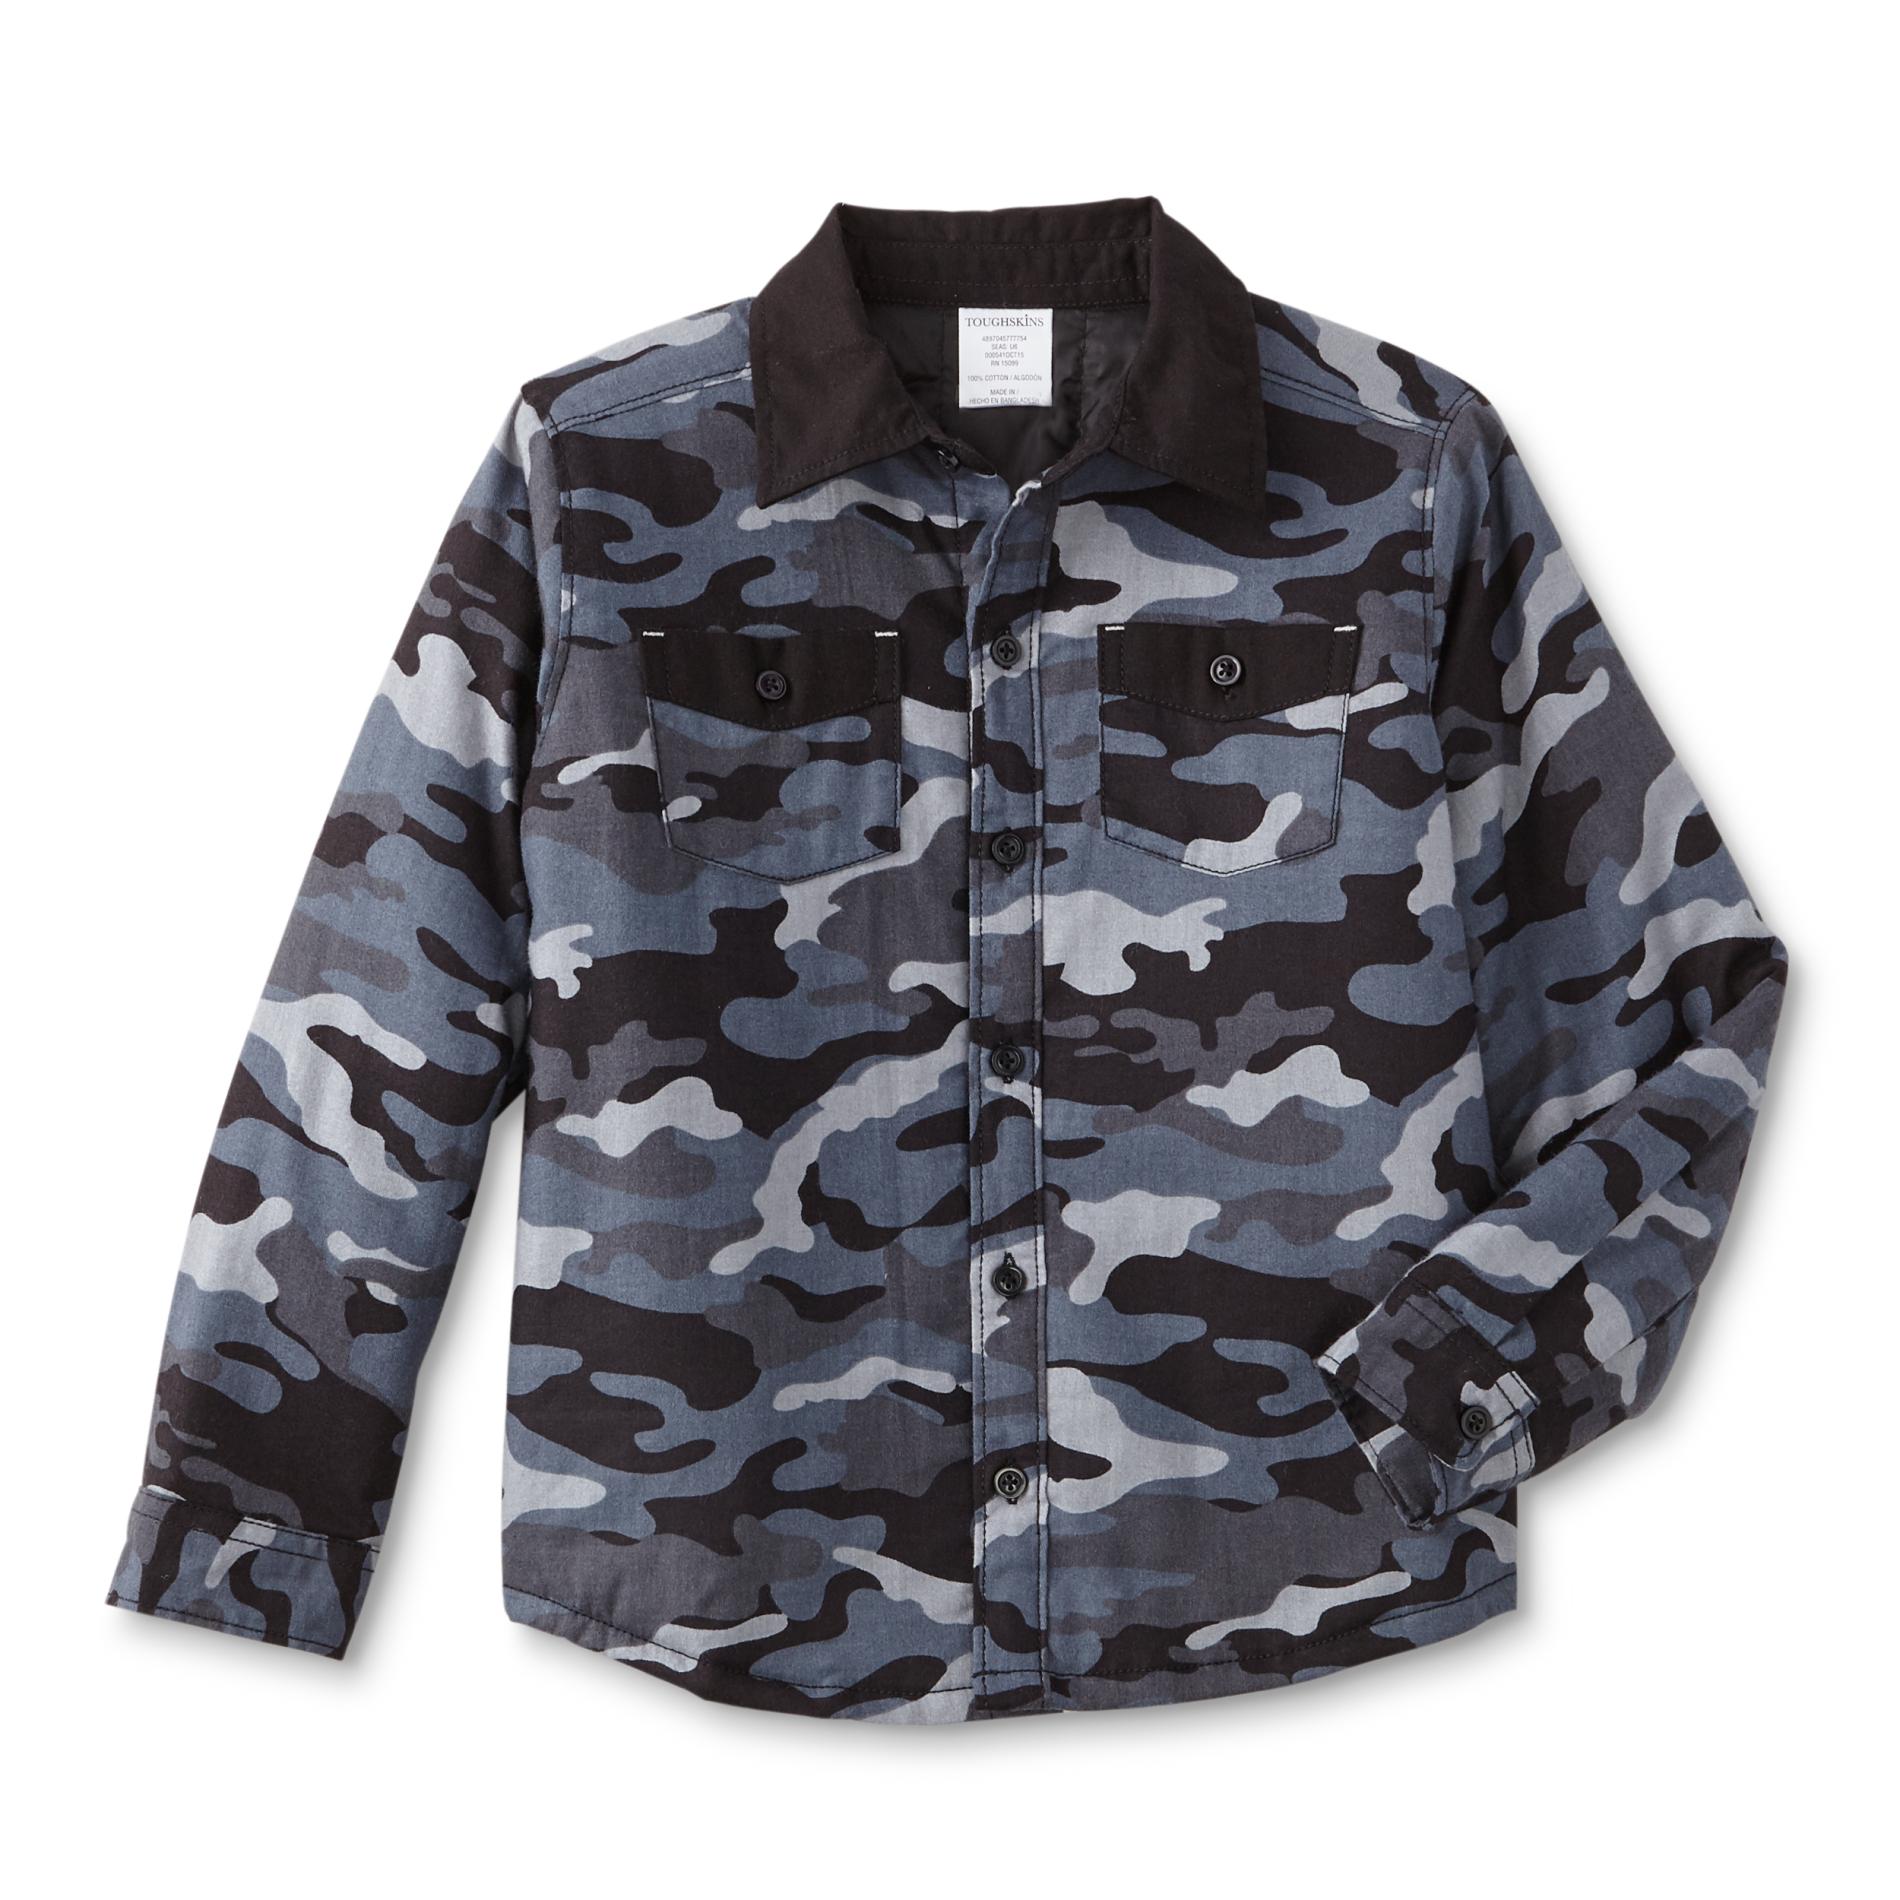 Toughskins Boys' Flannel Jacket - Camouflage